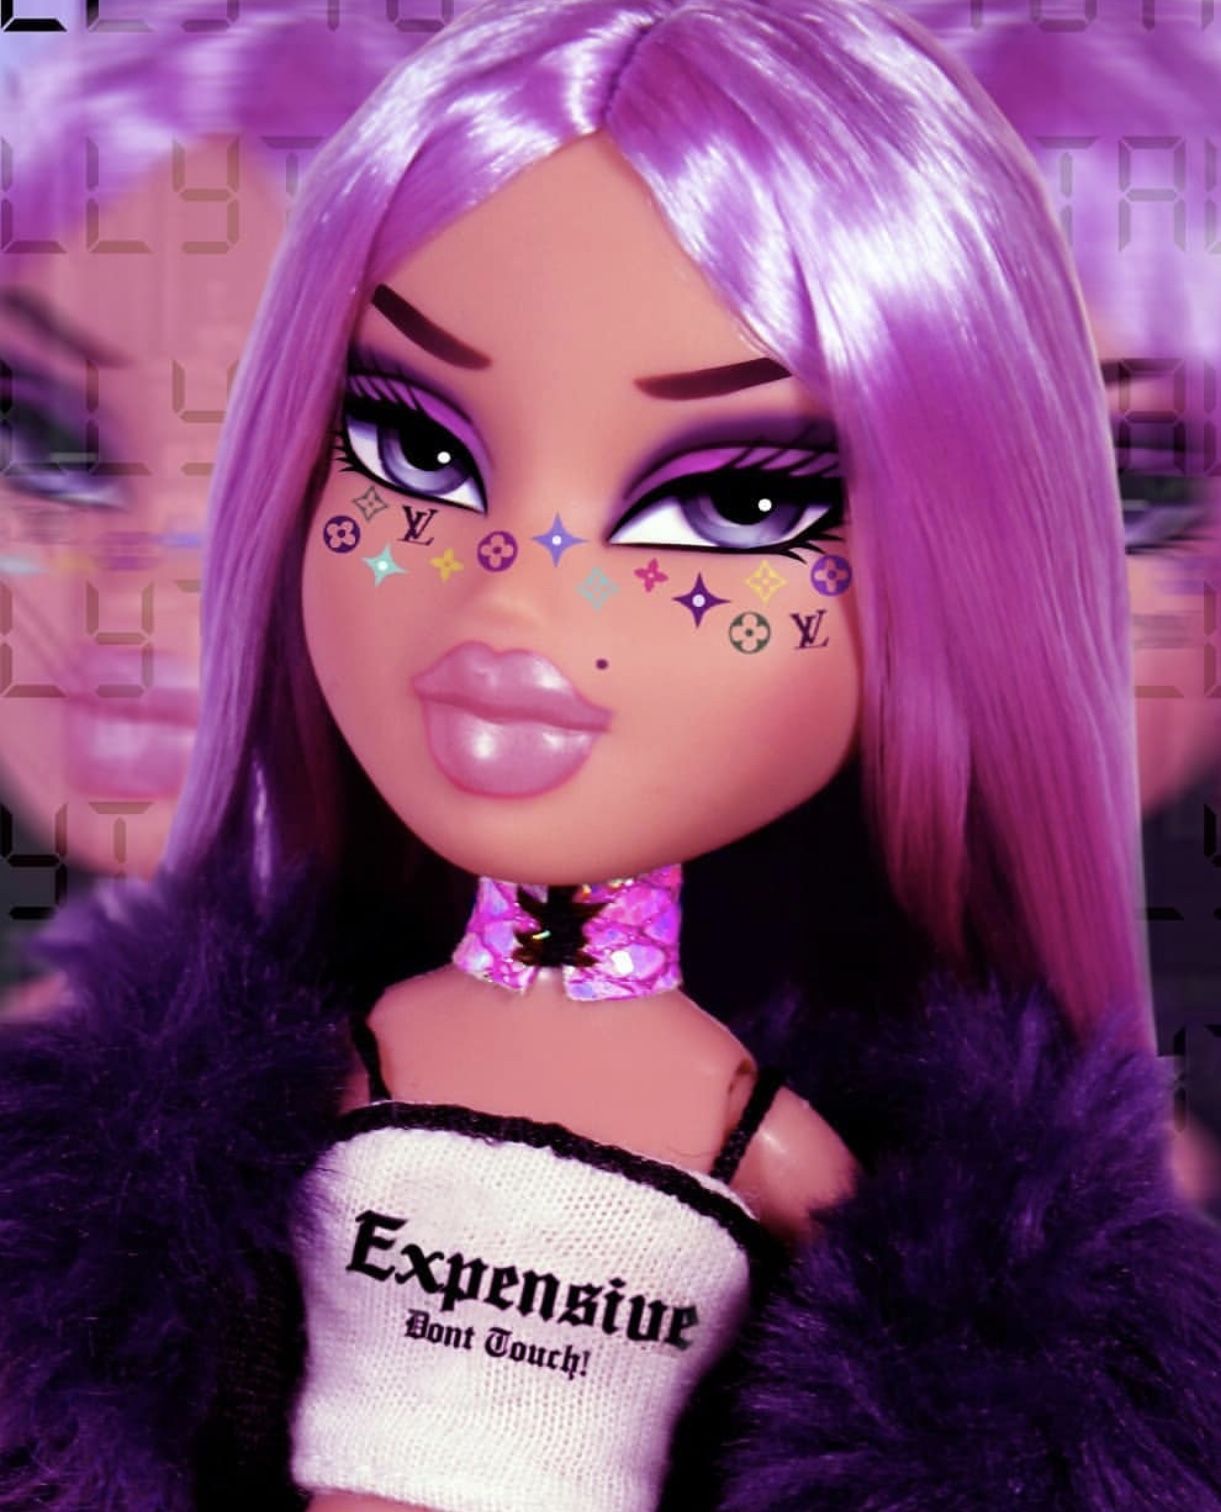 Baddie Pictures Aesthetic Bratz I Had So Much Fun With This Drawing Process And I Hope You All